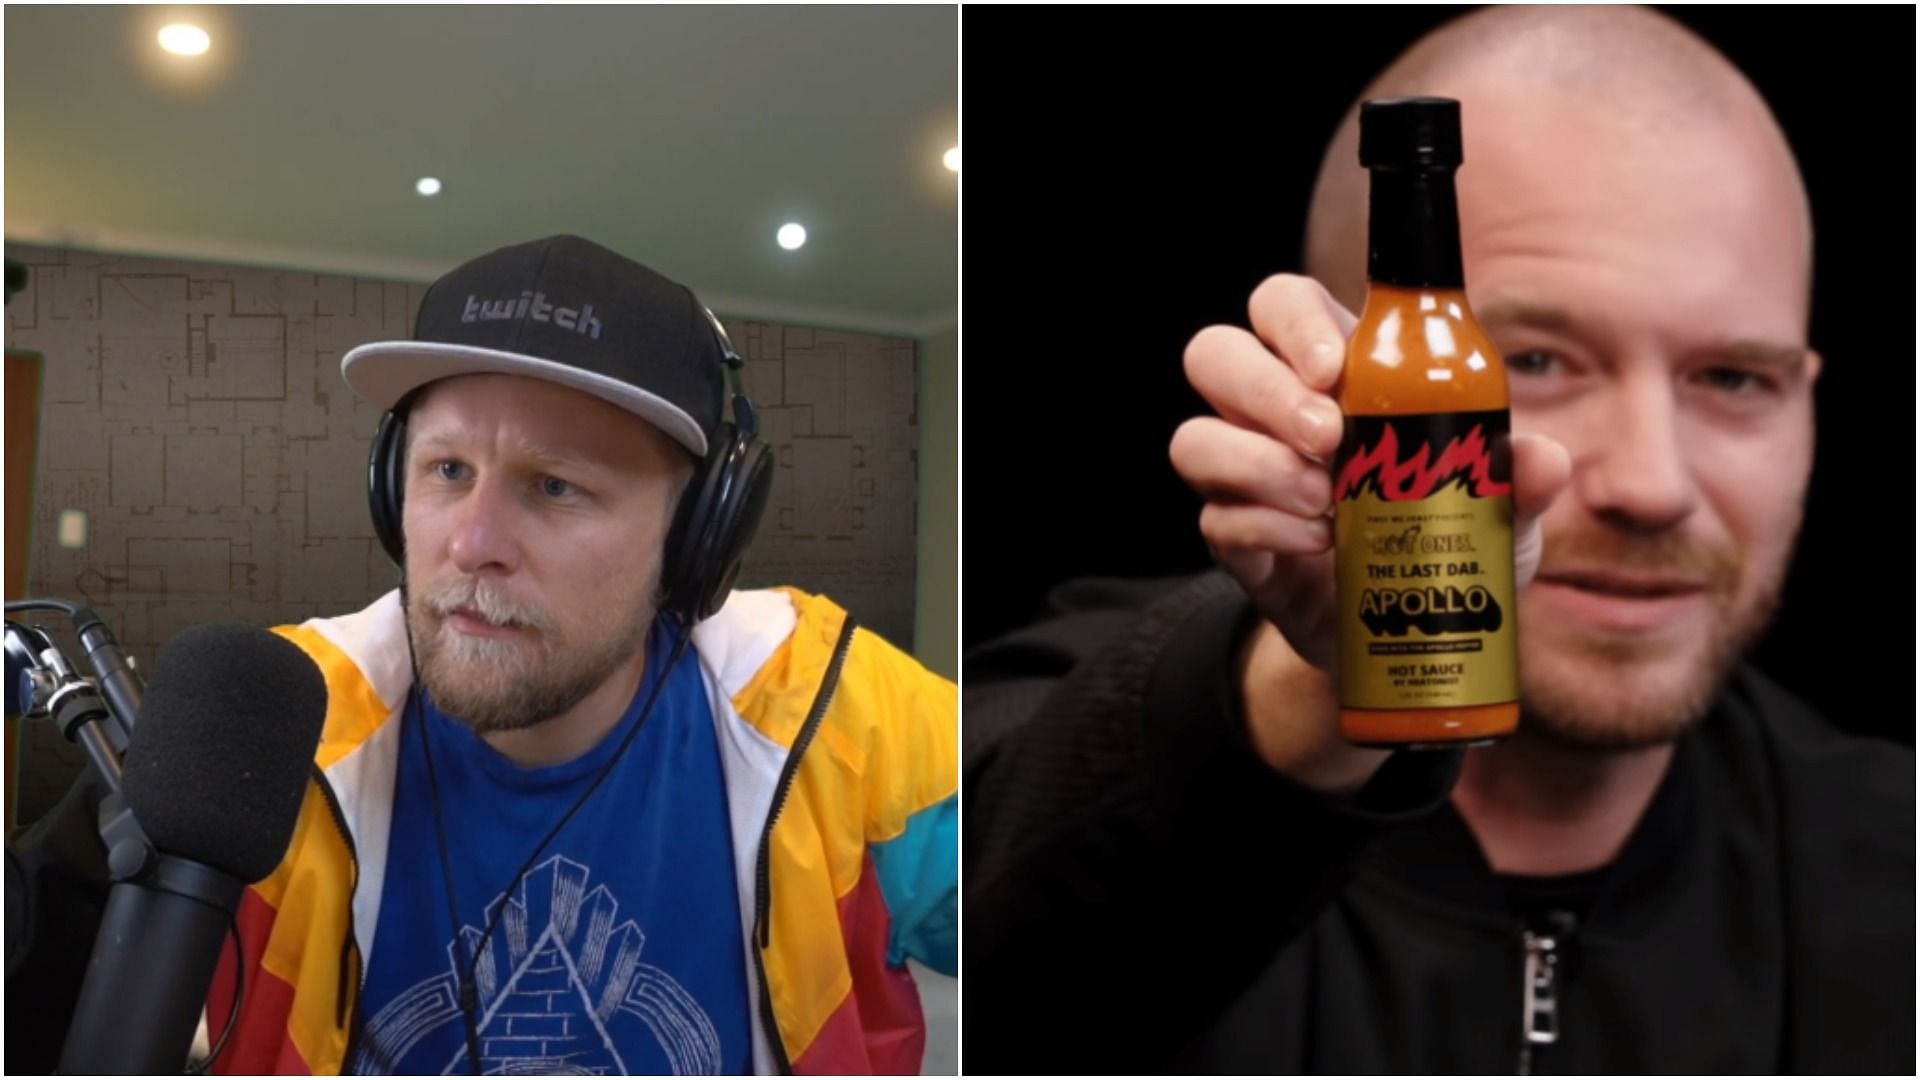 Streamer Quinn69 (pictured left) attempted to take on The Last Dab: Apollo, one of the most famous hot sauces with a Scoville rating of over 2 million (Image via Sportskeeda)